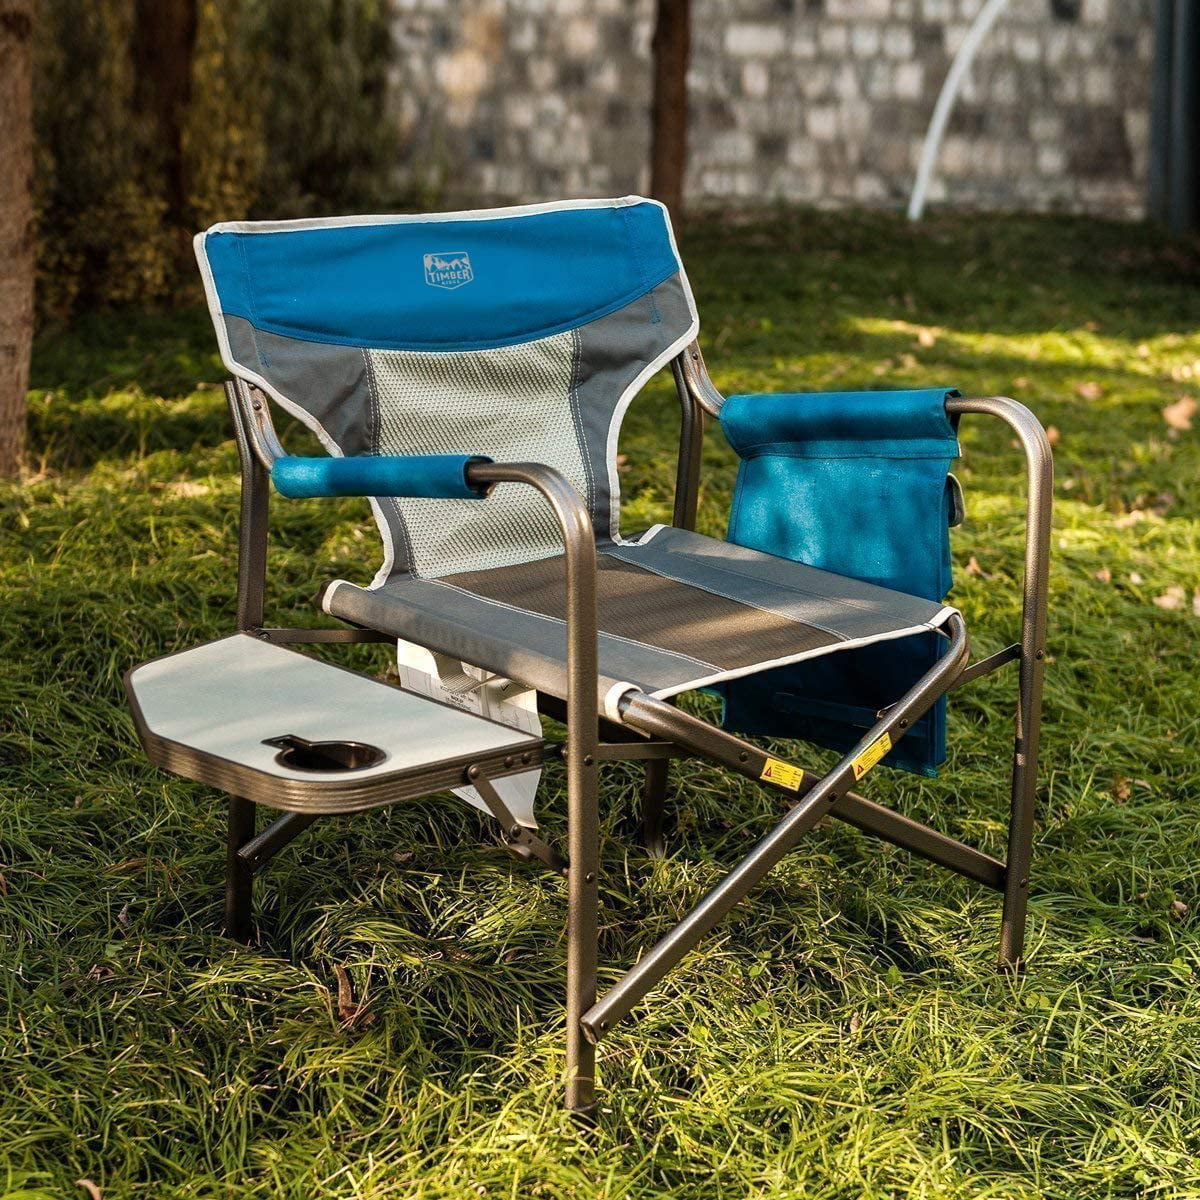 Timber Ridge Portable Folding Camping Directors Chair with Side Table